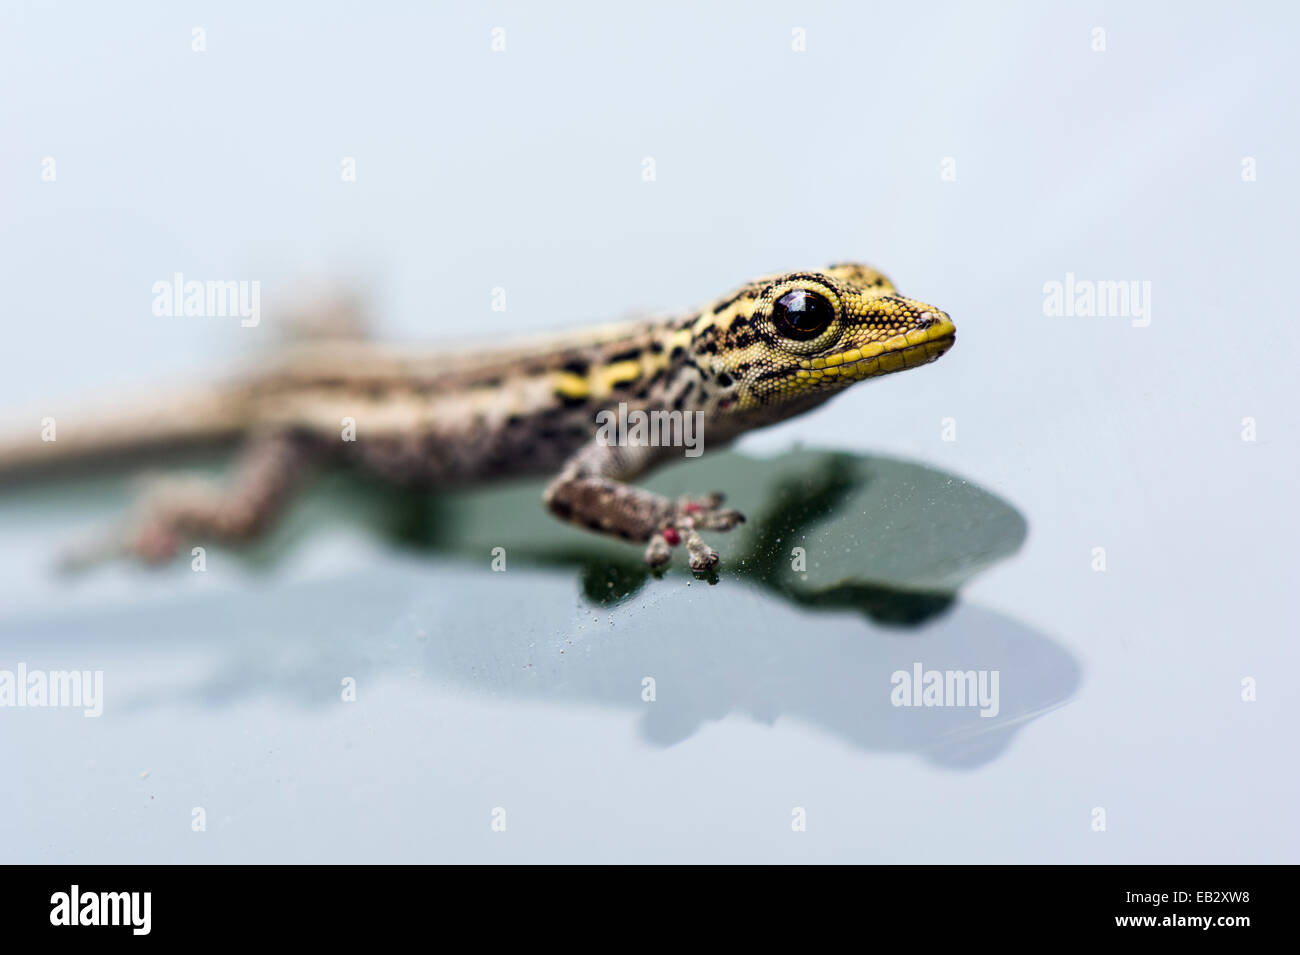 A Yellow-headed Dwarf Gecko clinging to the glass of a vehicle windshield. Stock Photo